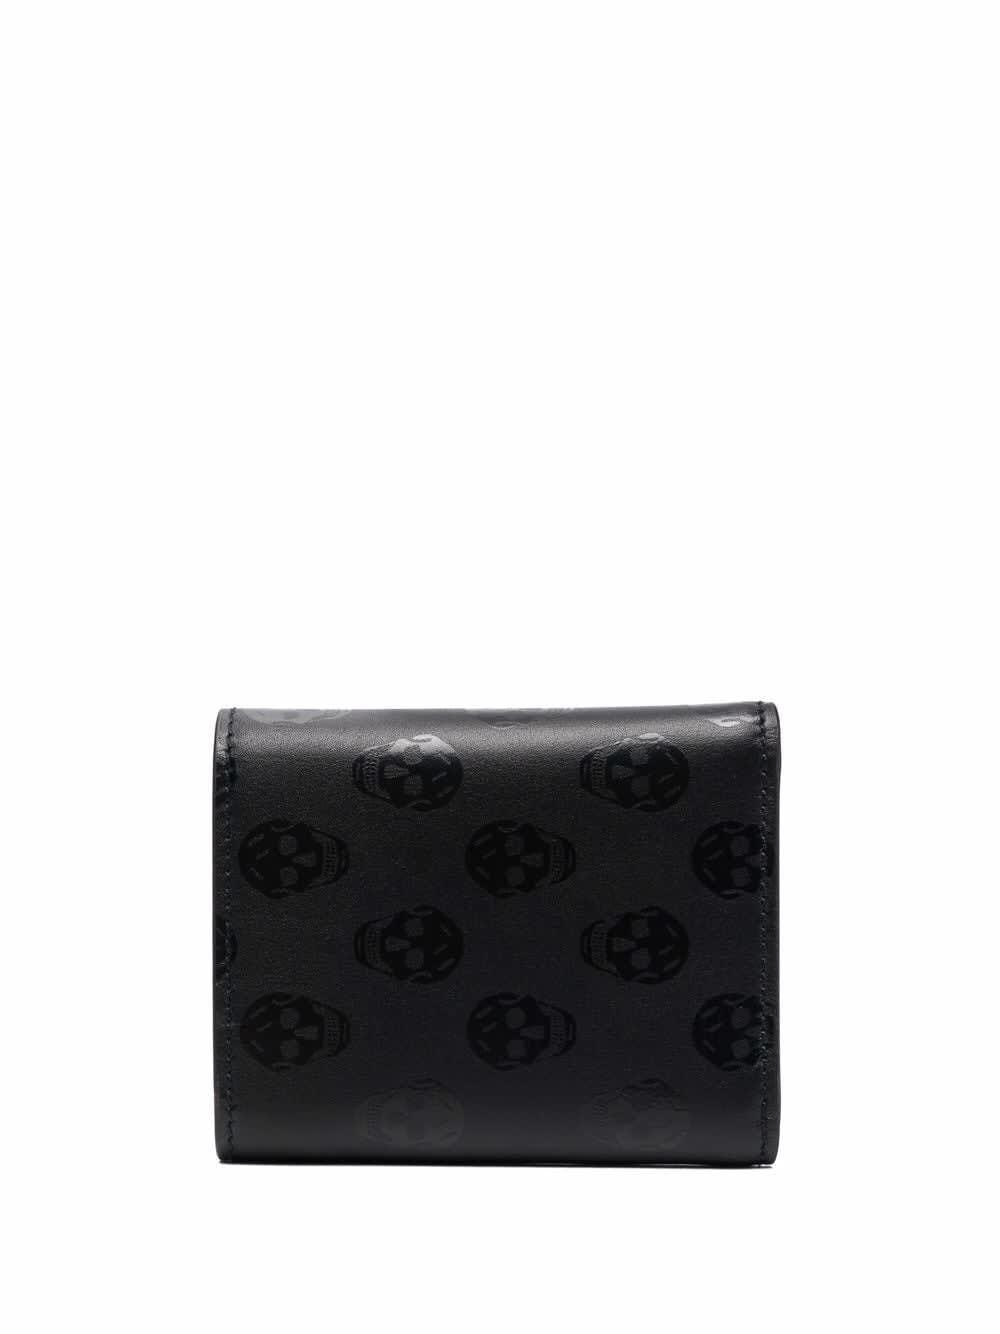 ALEXANDER MCQUEEN MAN CARD HOLDER IN BLACK LEATHER WITH SKULL MOTIF IN TONE